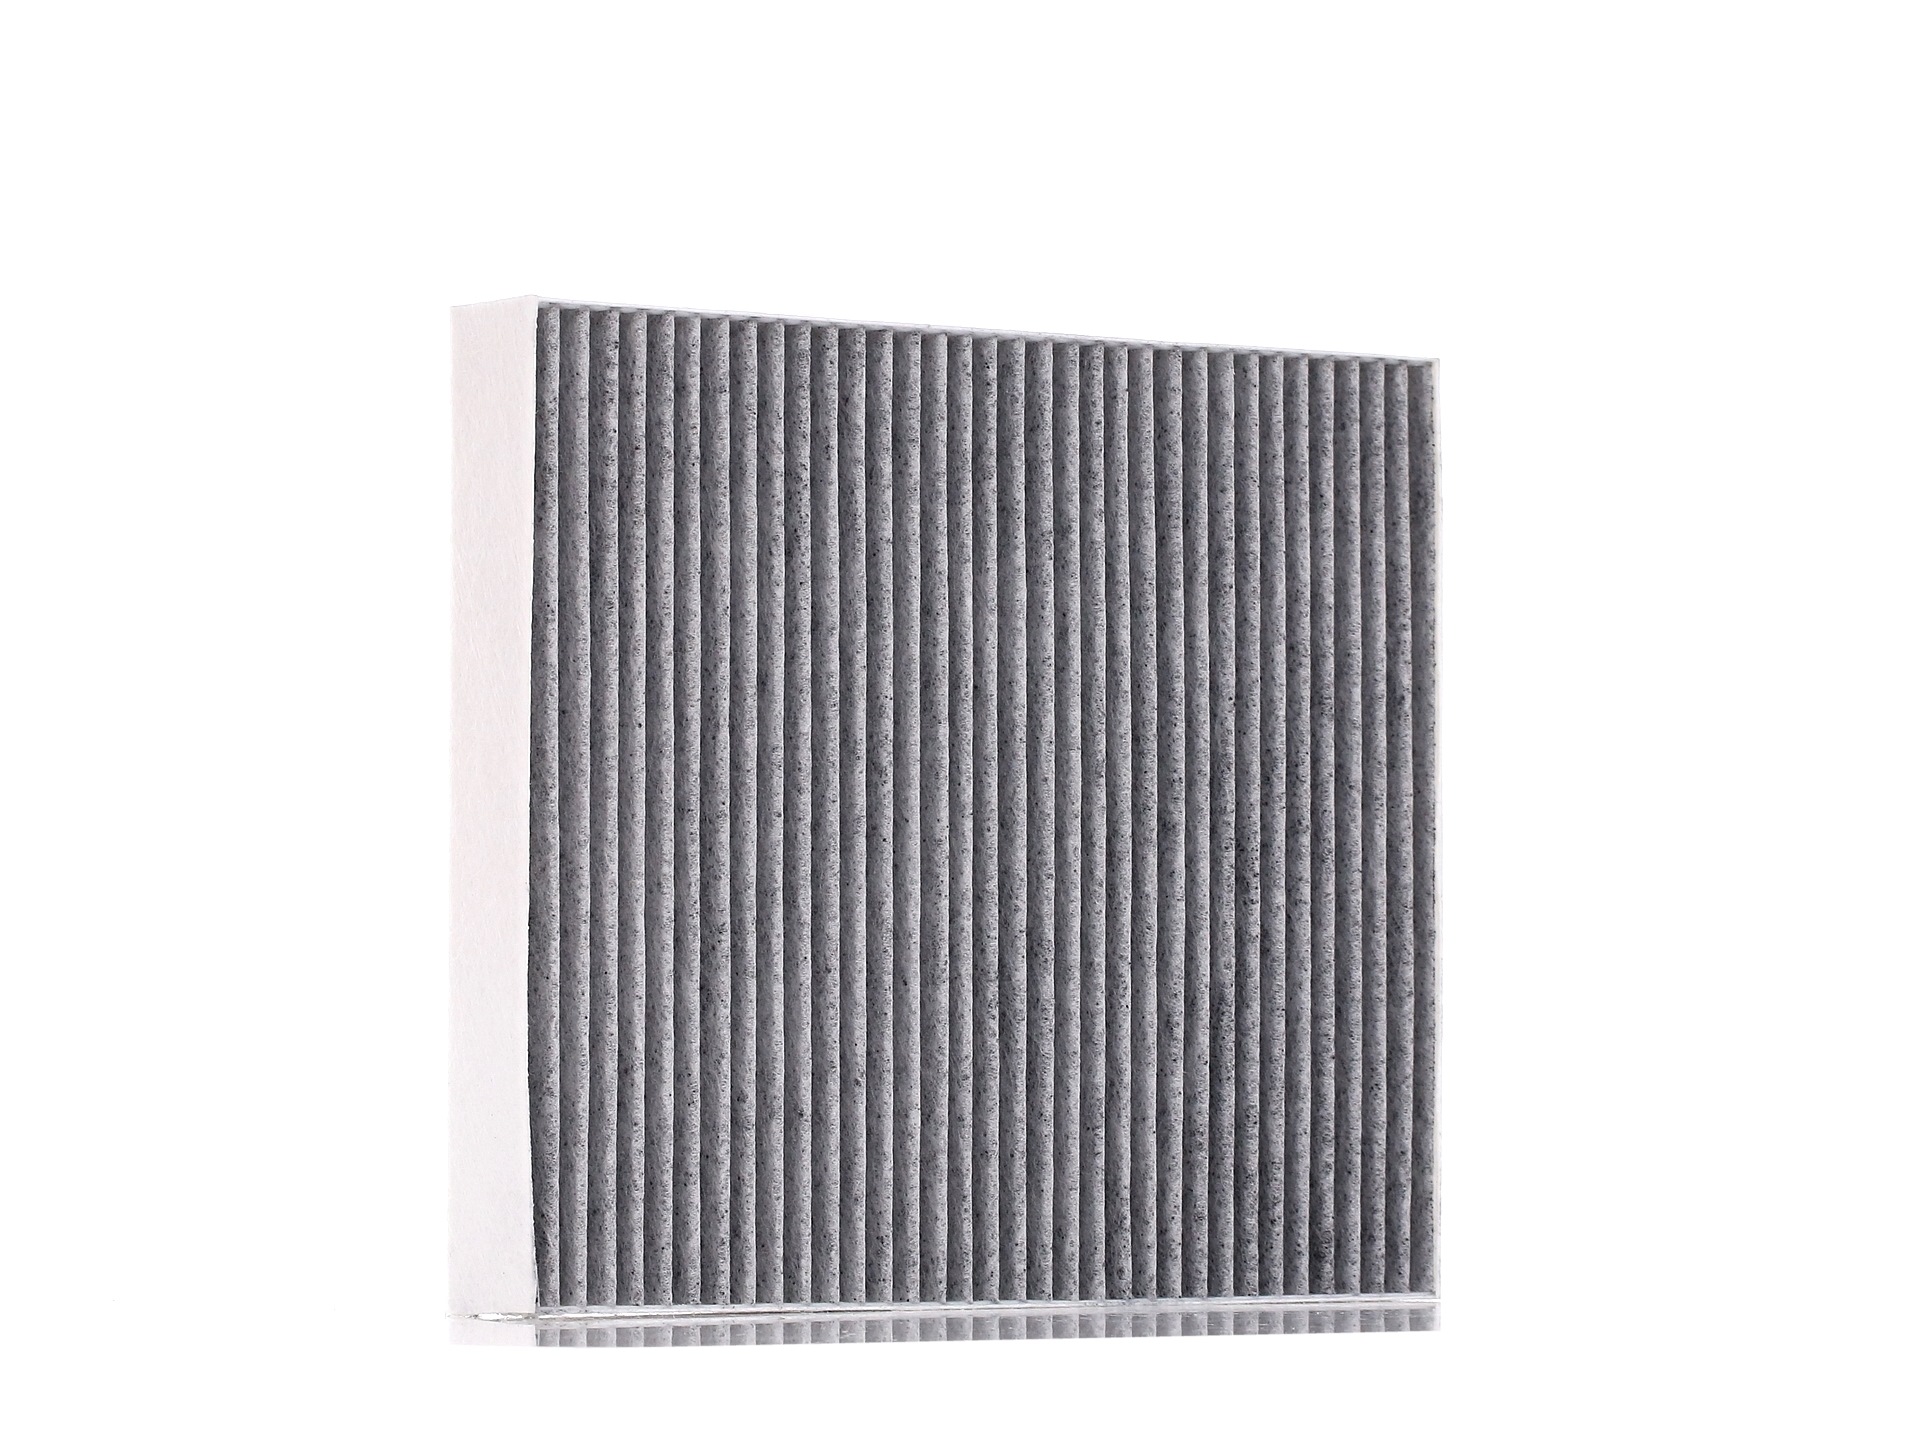 5678310000 HENGST FILTER Activated Carbon Filter, 240 mm x 205 mm x 31 mm Width: 205mm, Height: 31mm, Length: 240mm Cabin filter E3907LC buy